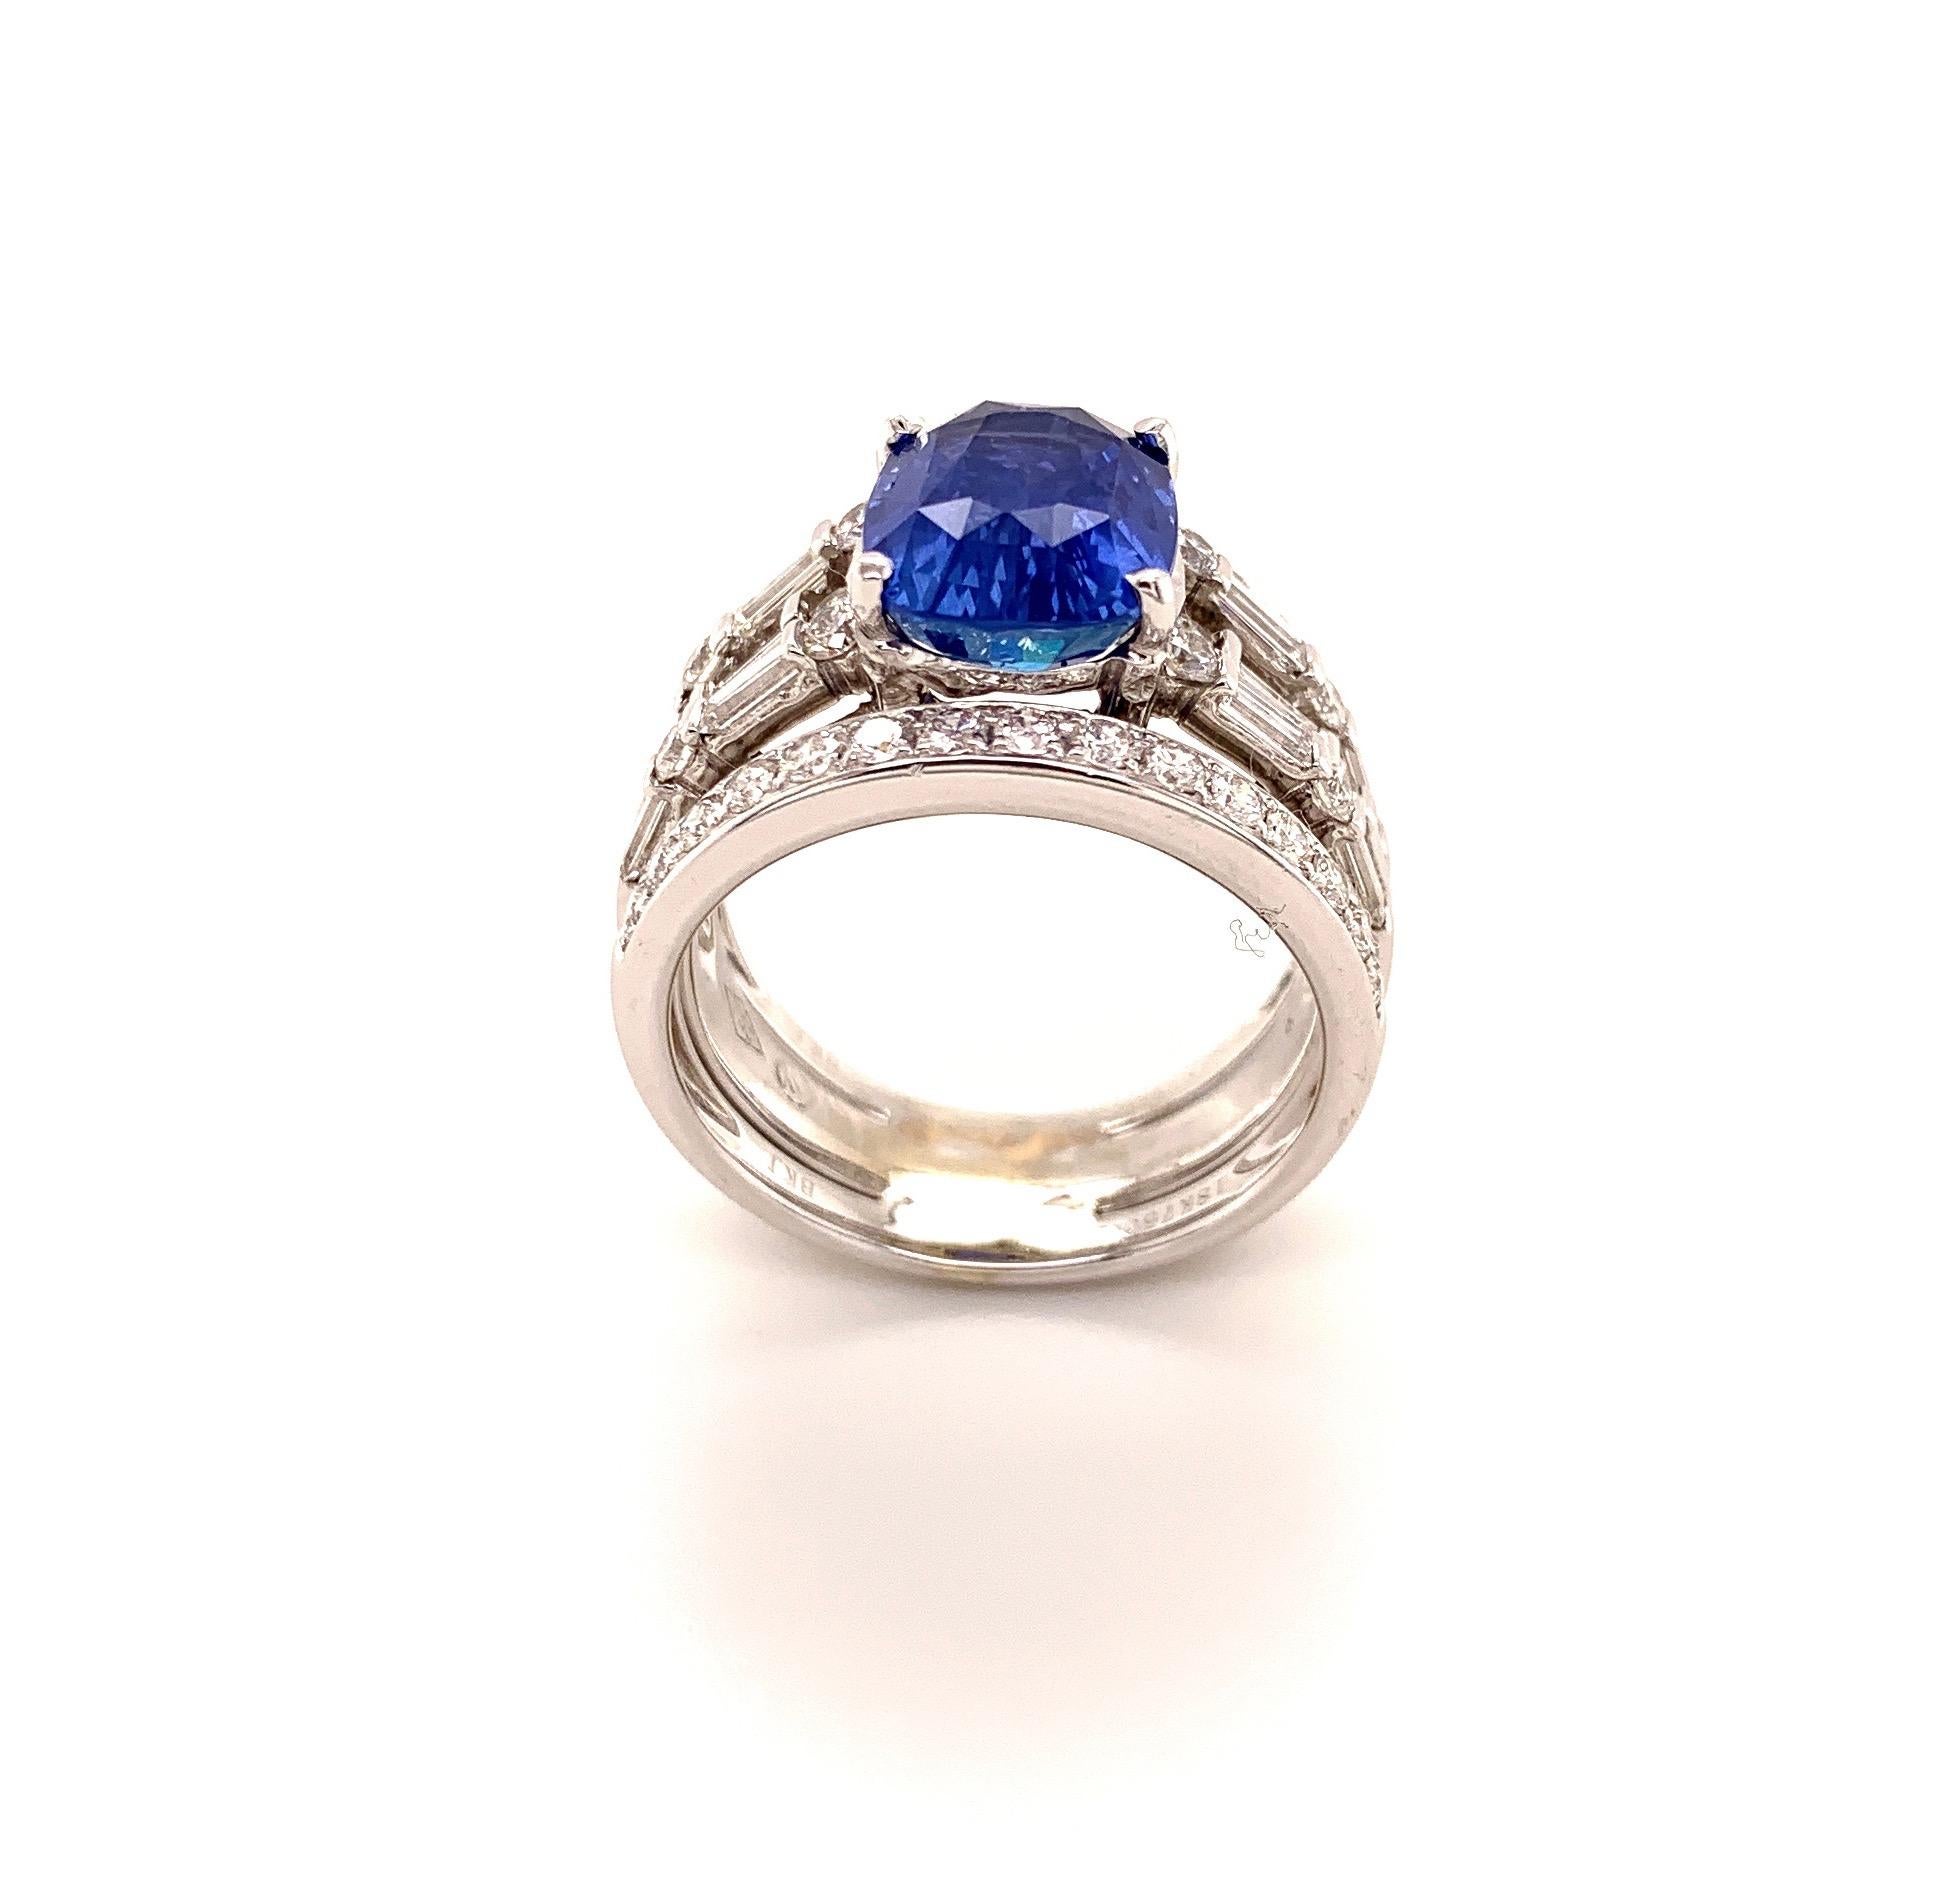 This GIA certified no heat blue cushion shape sapphire weighs 4.58 carats is from Sri Lanka, where we hand picked the stone a few years ago. It is mounted in an 18-karat white gold ring purchased from one of our suppliers. The sapphire is nestled